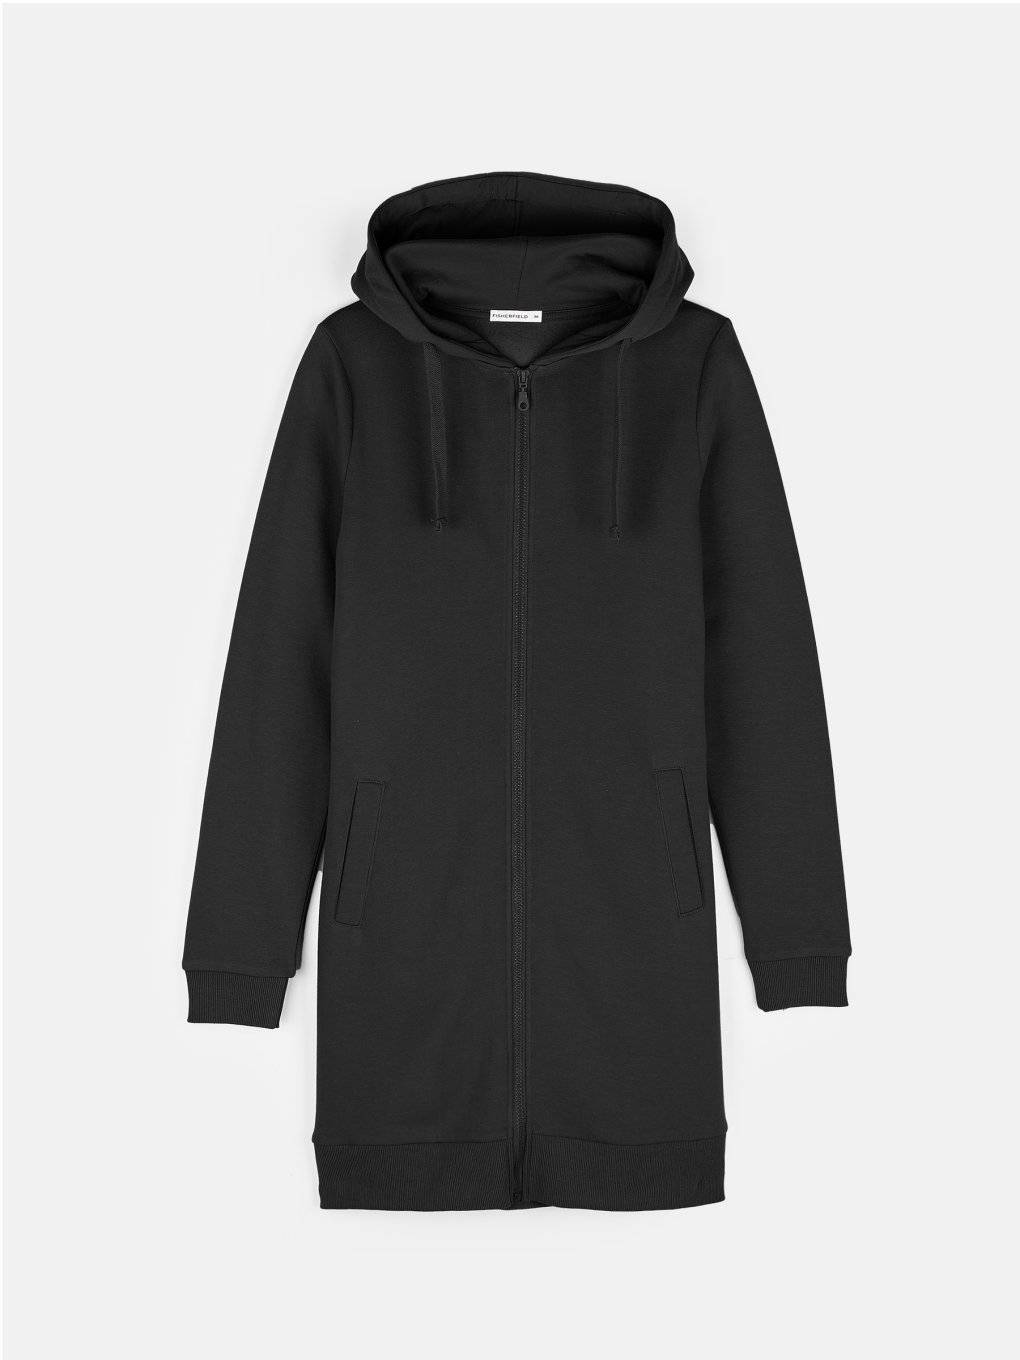 Longline zip-up hoodie with pockets